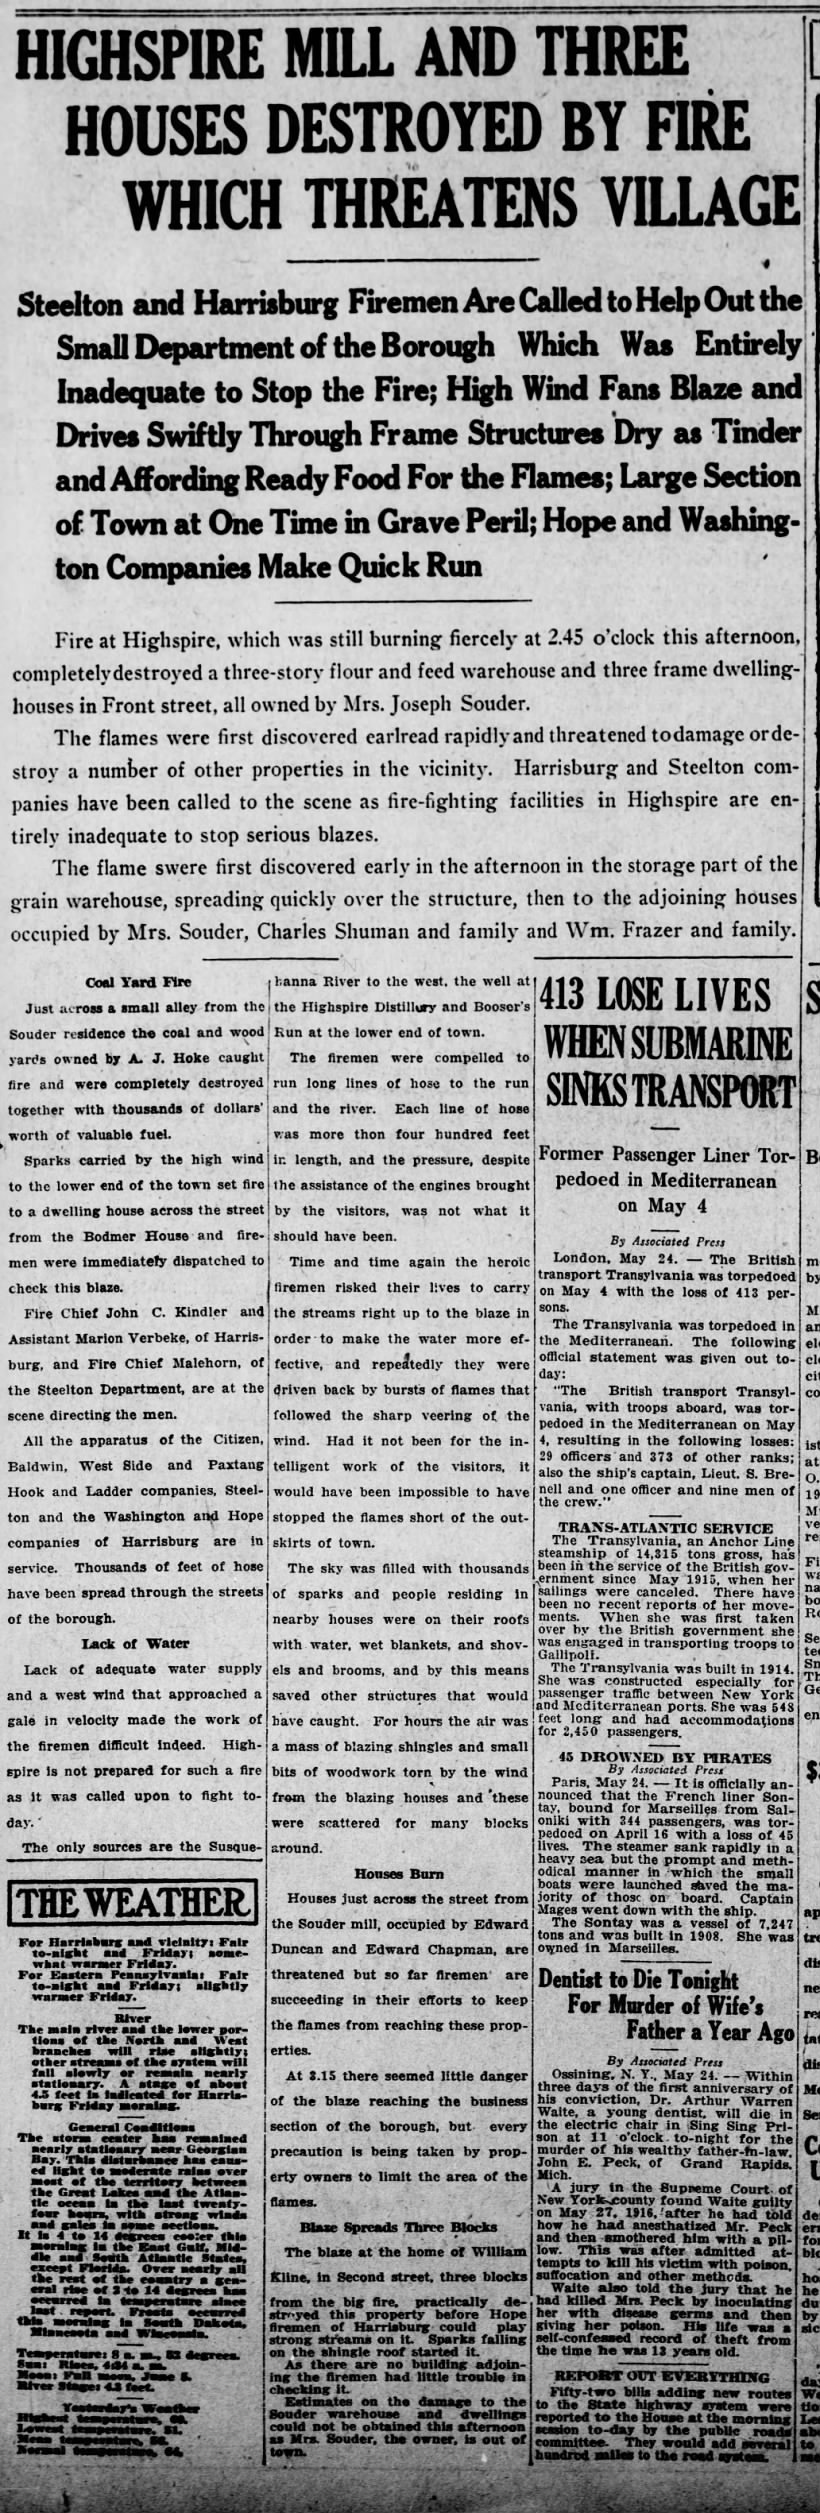 1917 fire article, 24 May1917